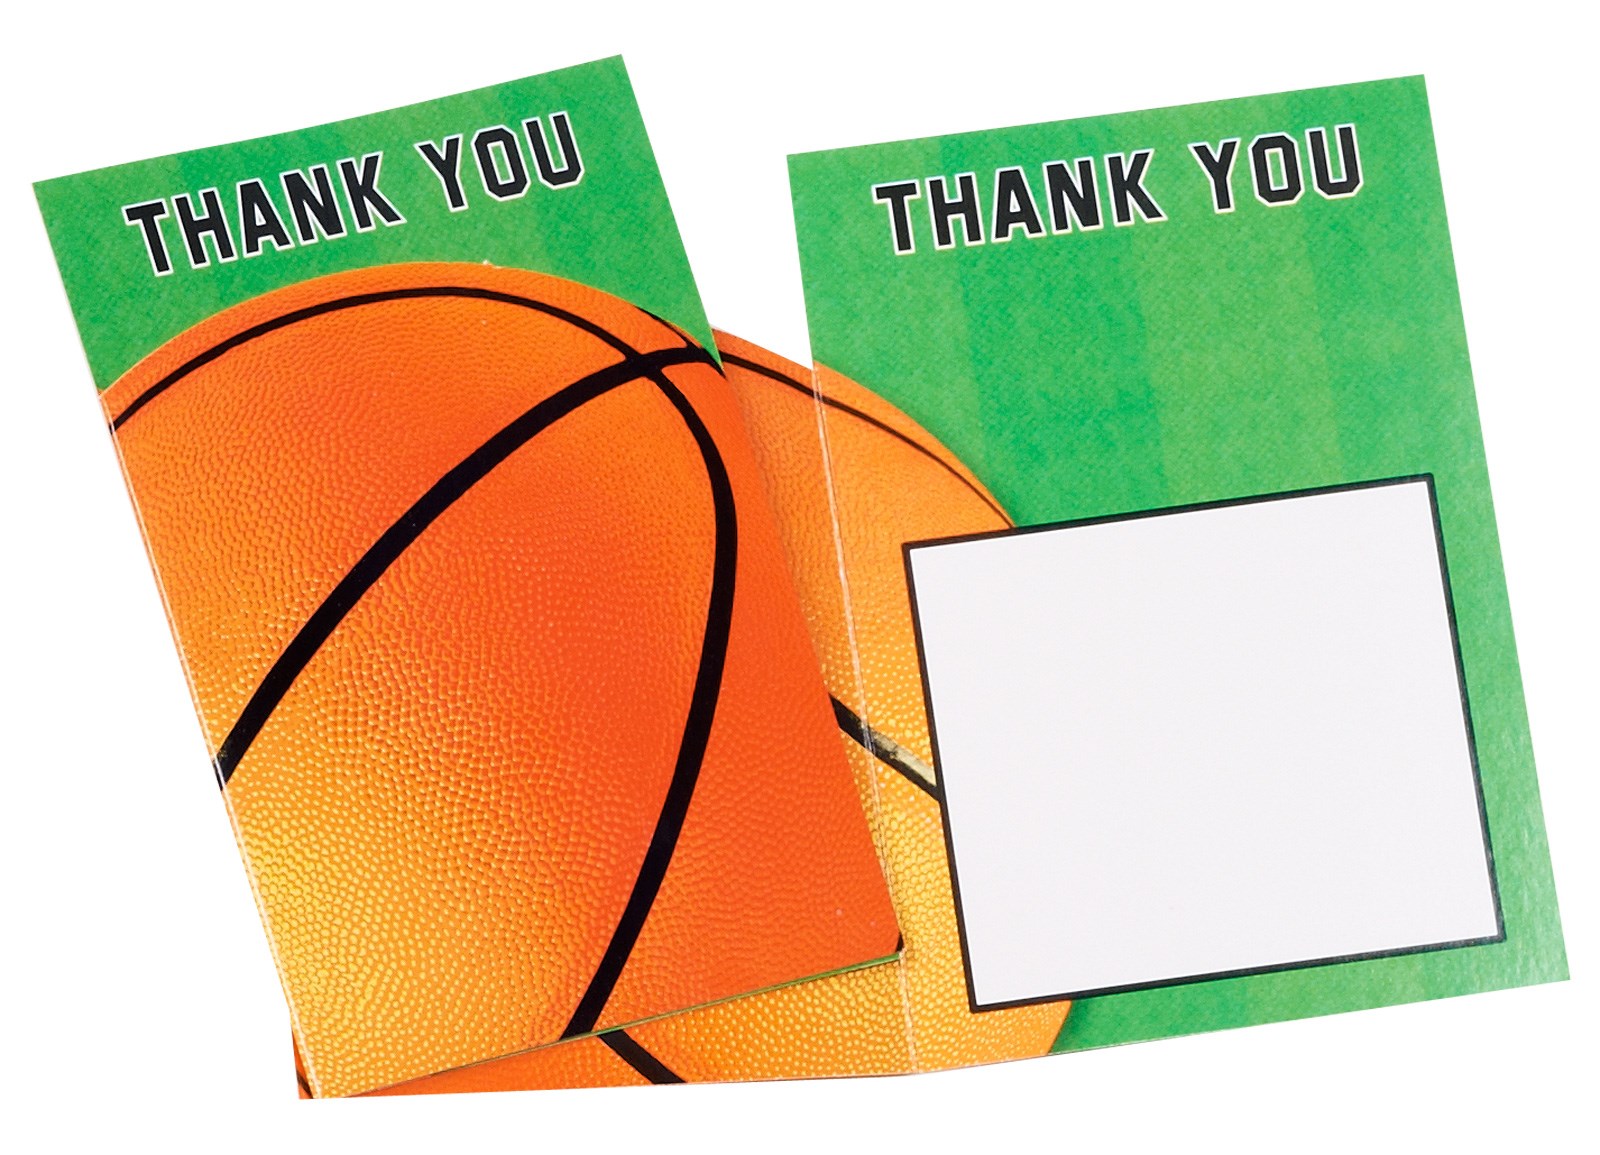 Basketball Fan – Thank You Cards 8 count